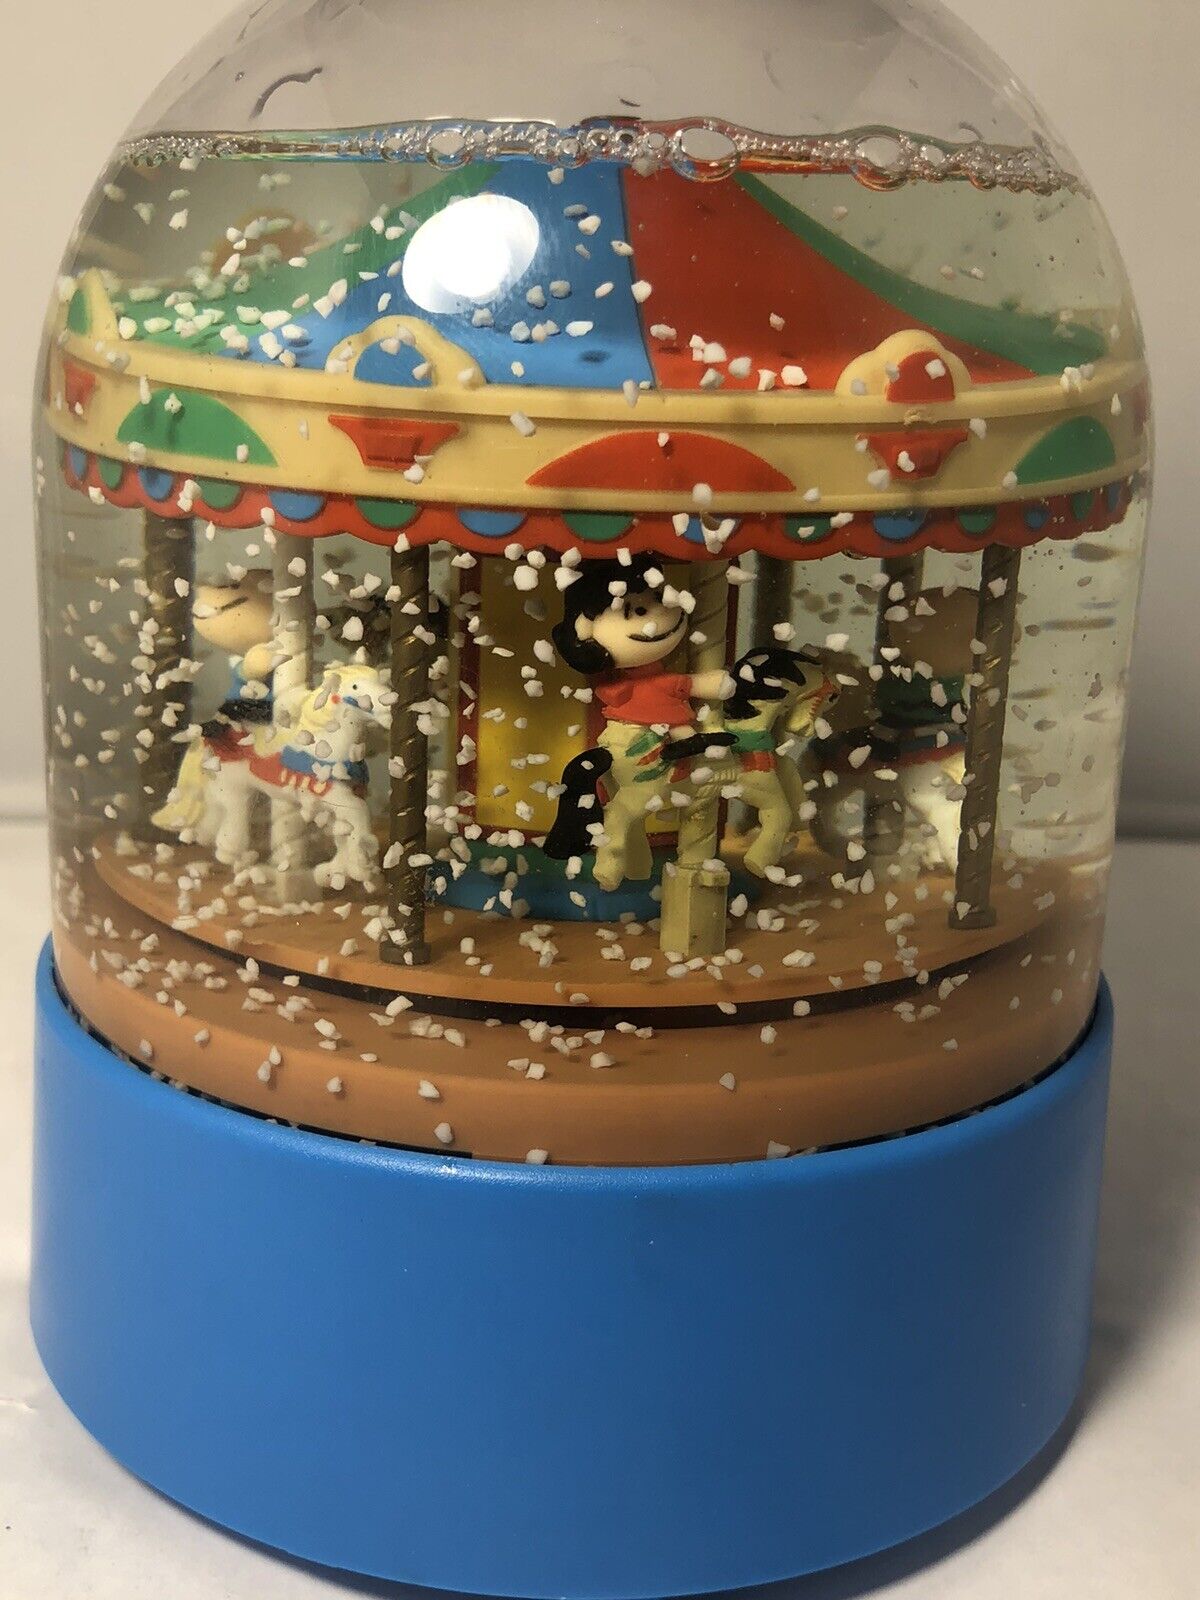 Rare Vintage Peanuts By Charles Schulz Musical Snow Globe w/Up & Down Action